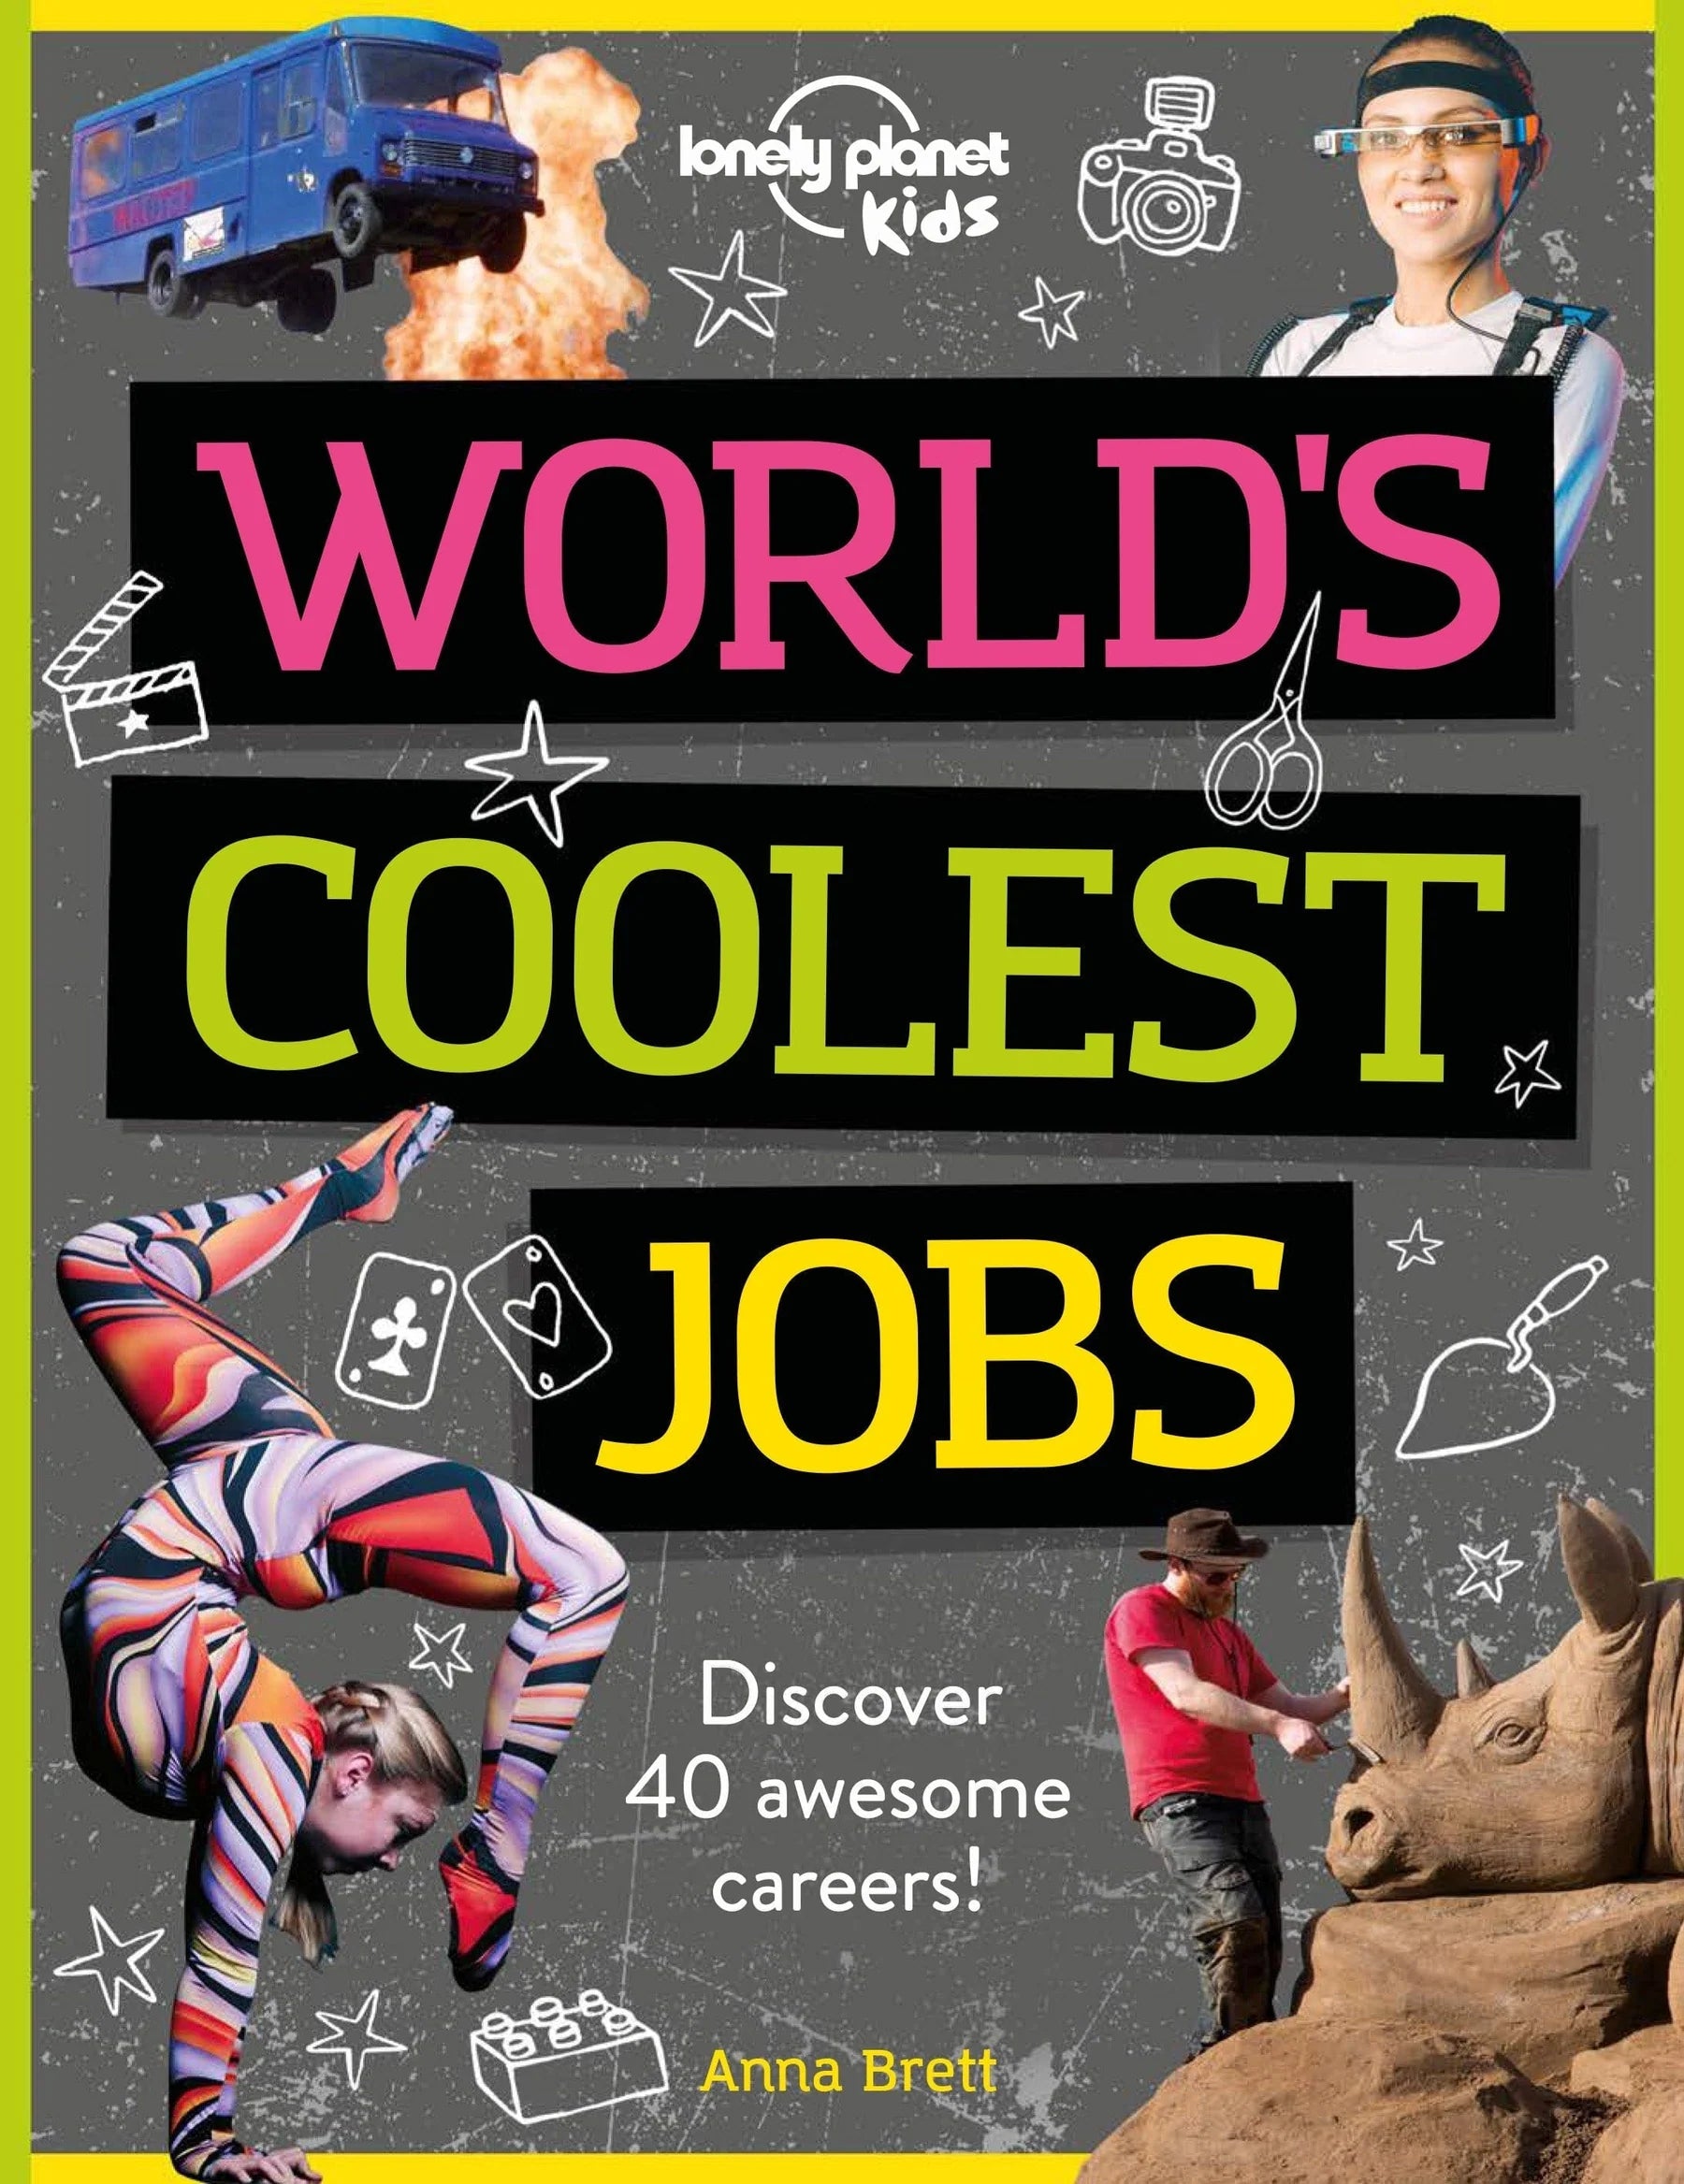 Lonely Planet Kids | World's Coolest Jobs